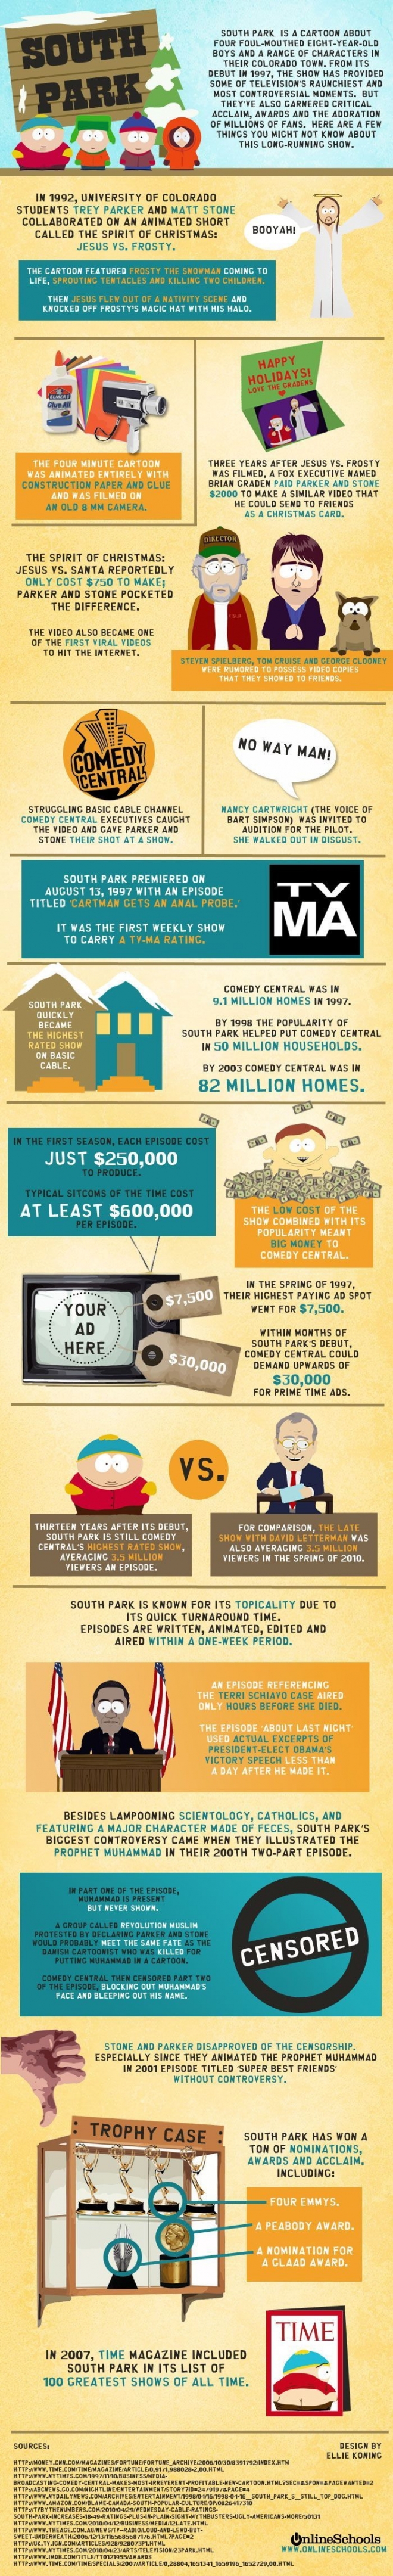 South Park infographic